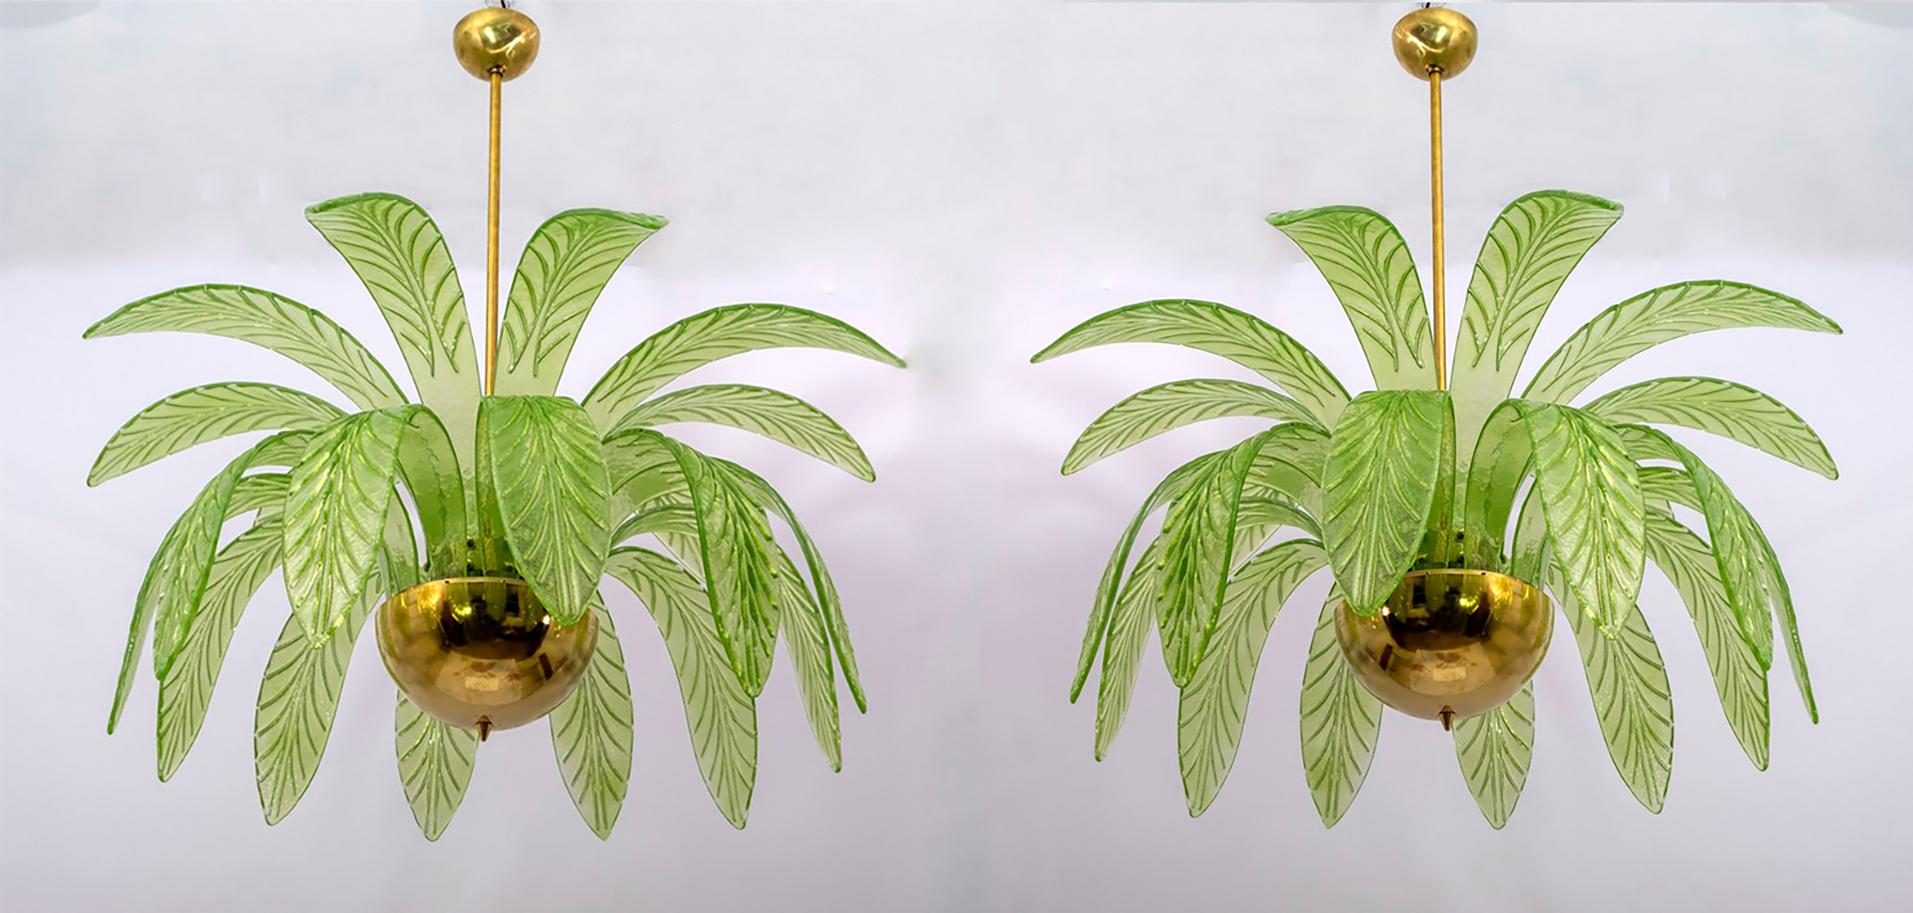 Pair of mouth-blown Murano glass chandeliers, green Murano glass leaves, brass structure, three light bulbs.
The chandelier reproduces the crown of a palm tree.
We supply reducers for E12 USA bulbs.